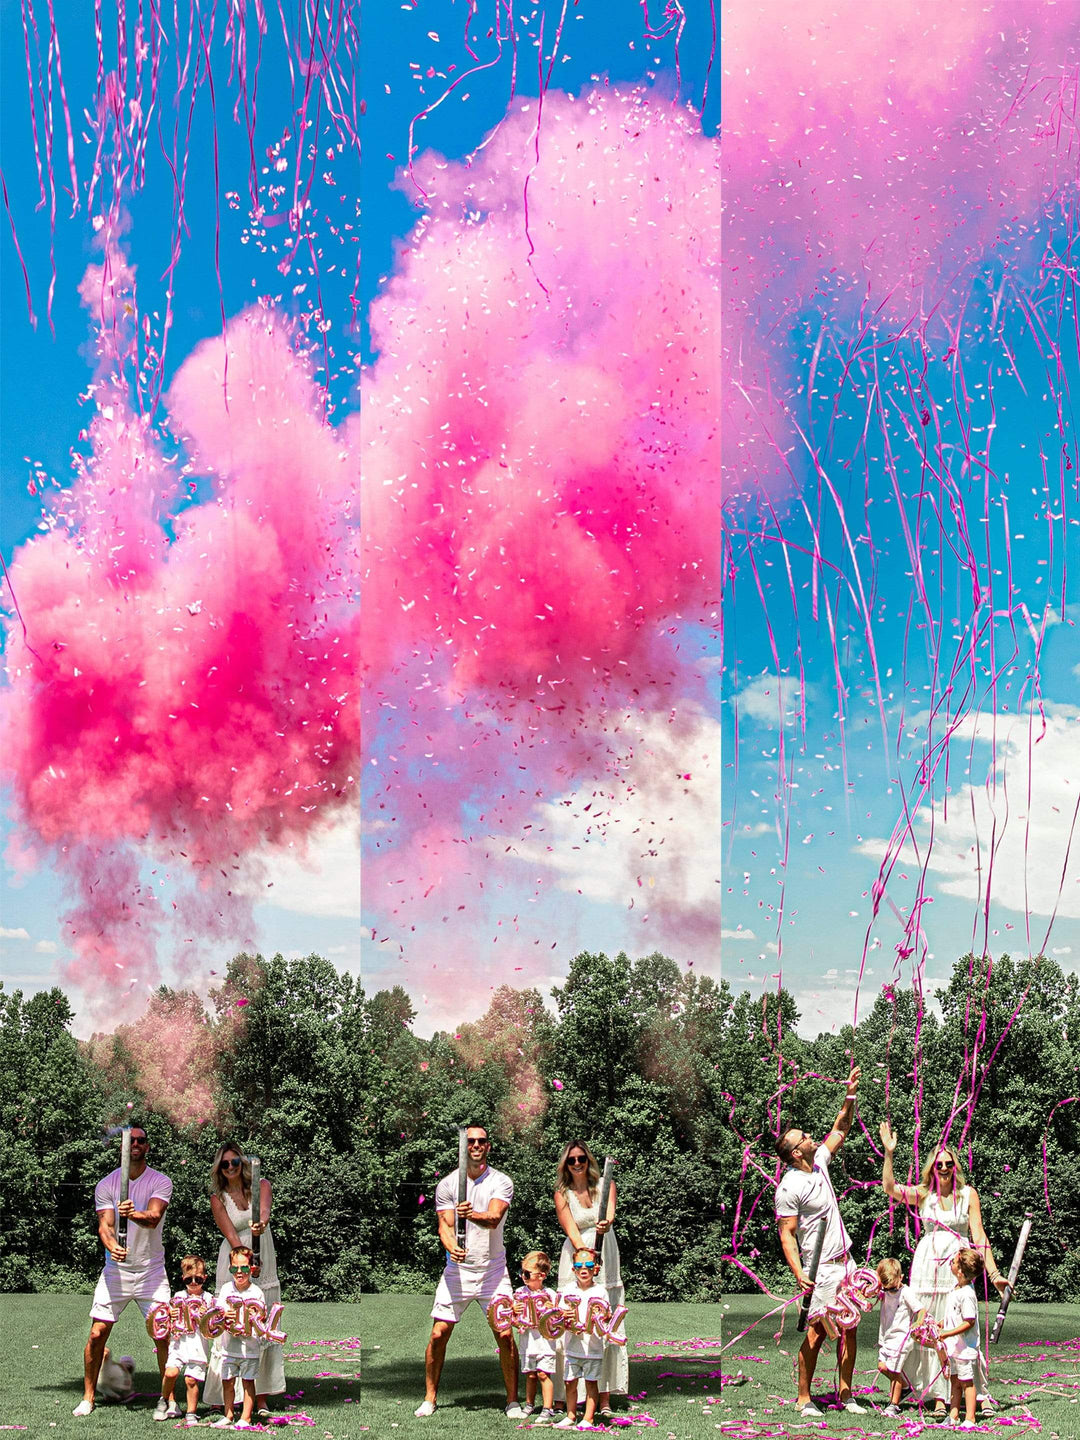 Confetti + Powder + Streamers Gender Reveal Cannons – POOF THERE IT IS!